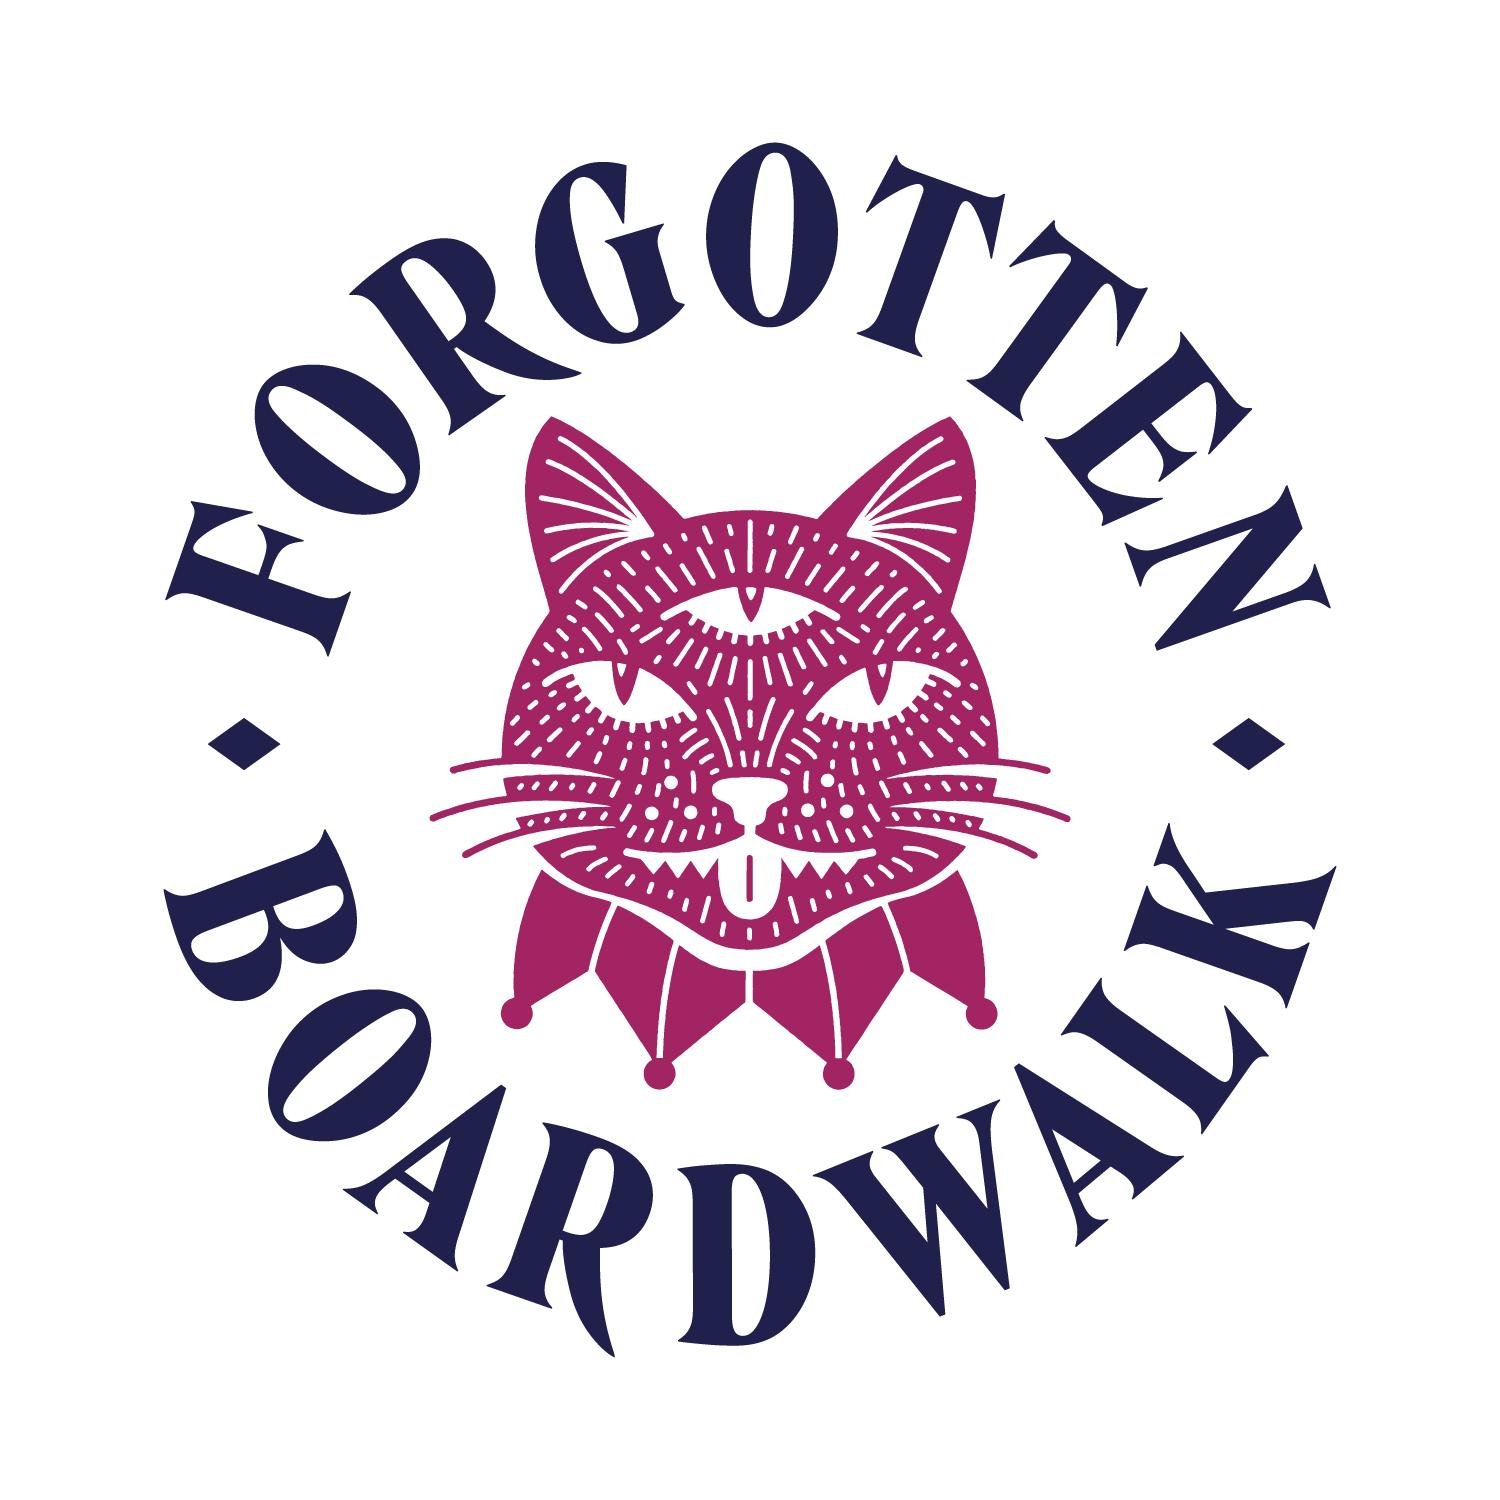 Forgotten Boardwalk Brewing Co - Craft Brewery & Refuge - Curious Ales & Tall Tales
1940 Olney Avenue Cherry Hill NJ 08003
(856) 437-0709